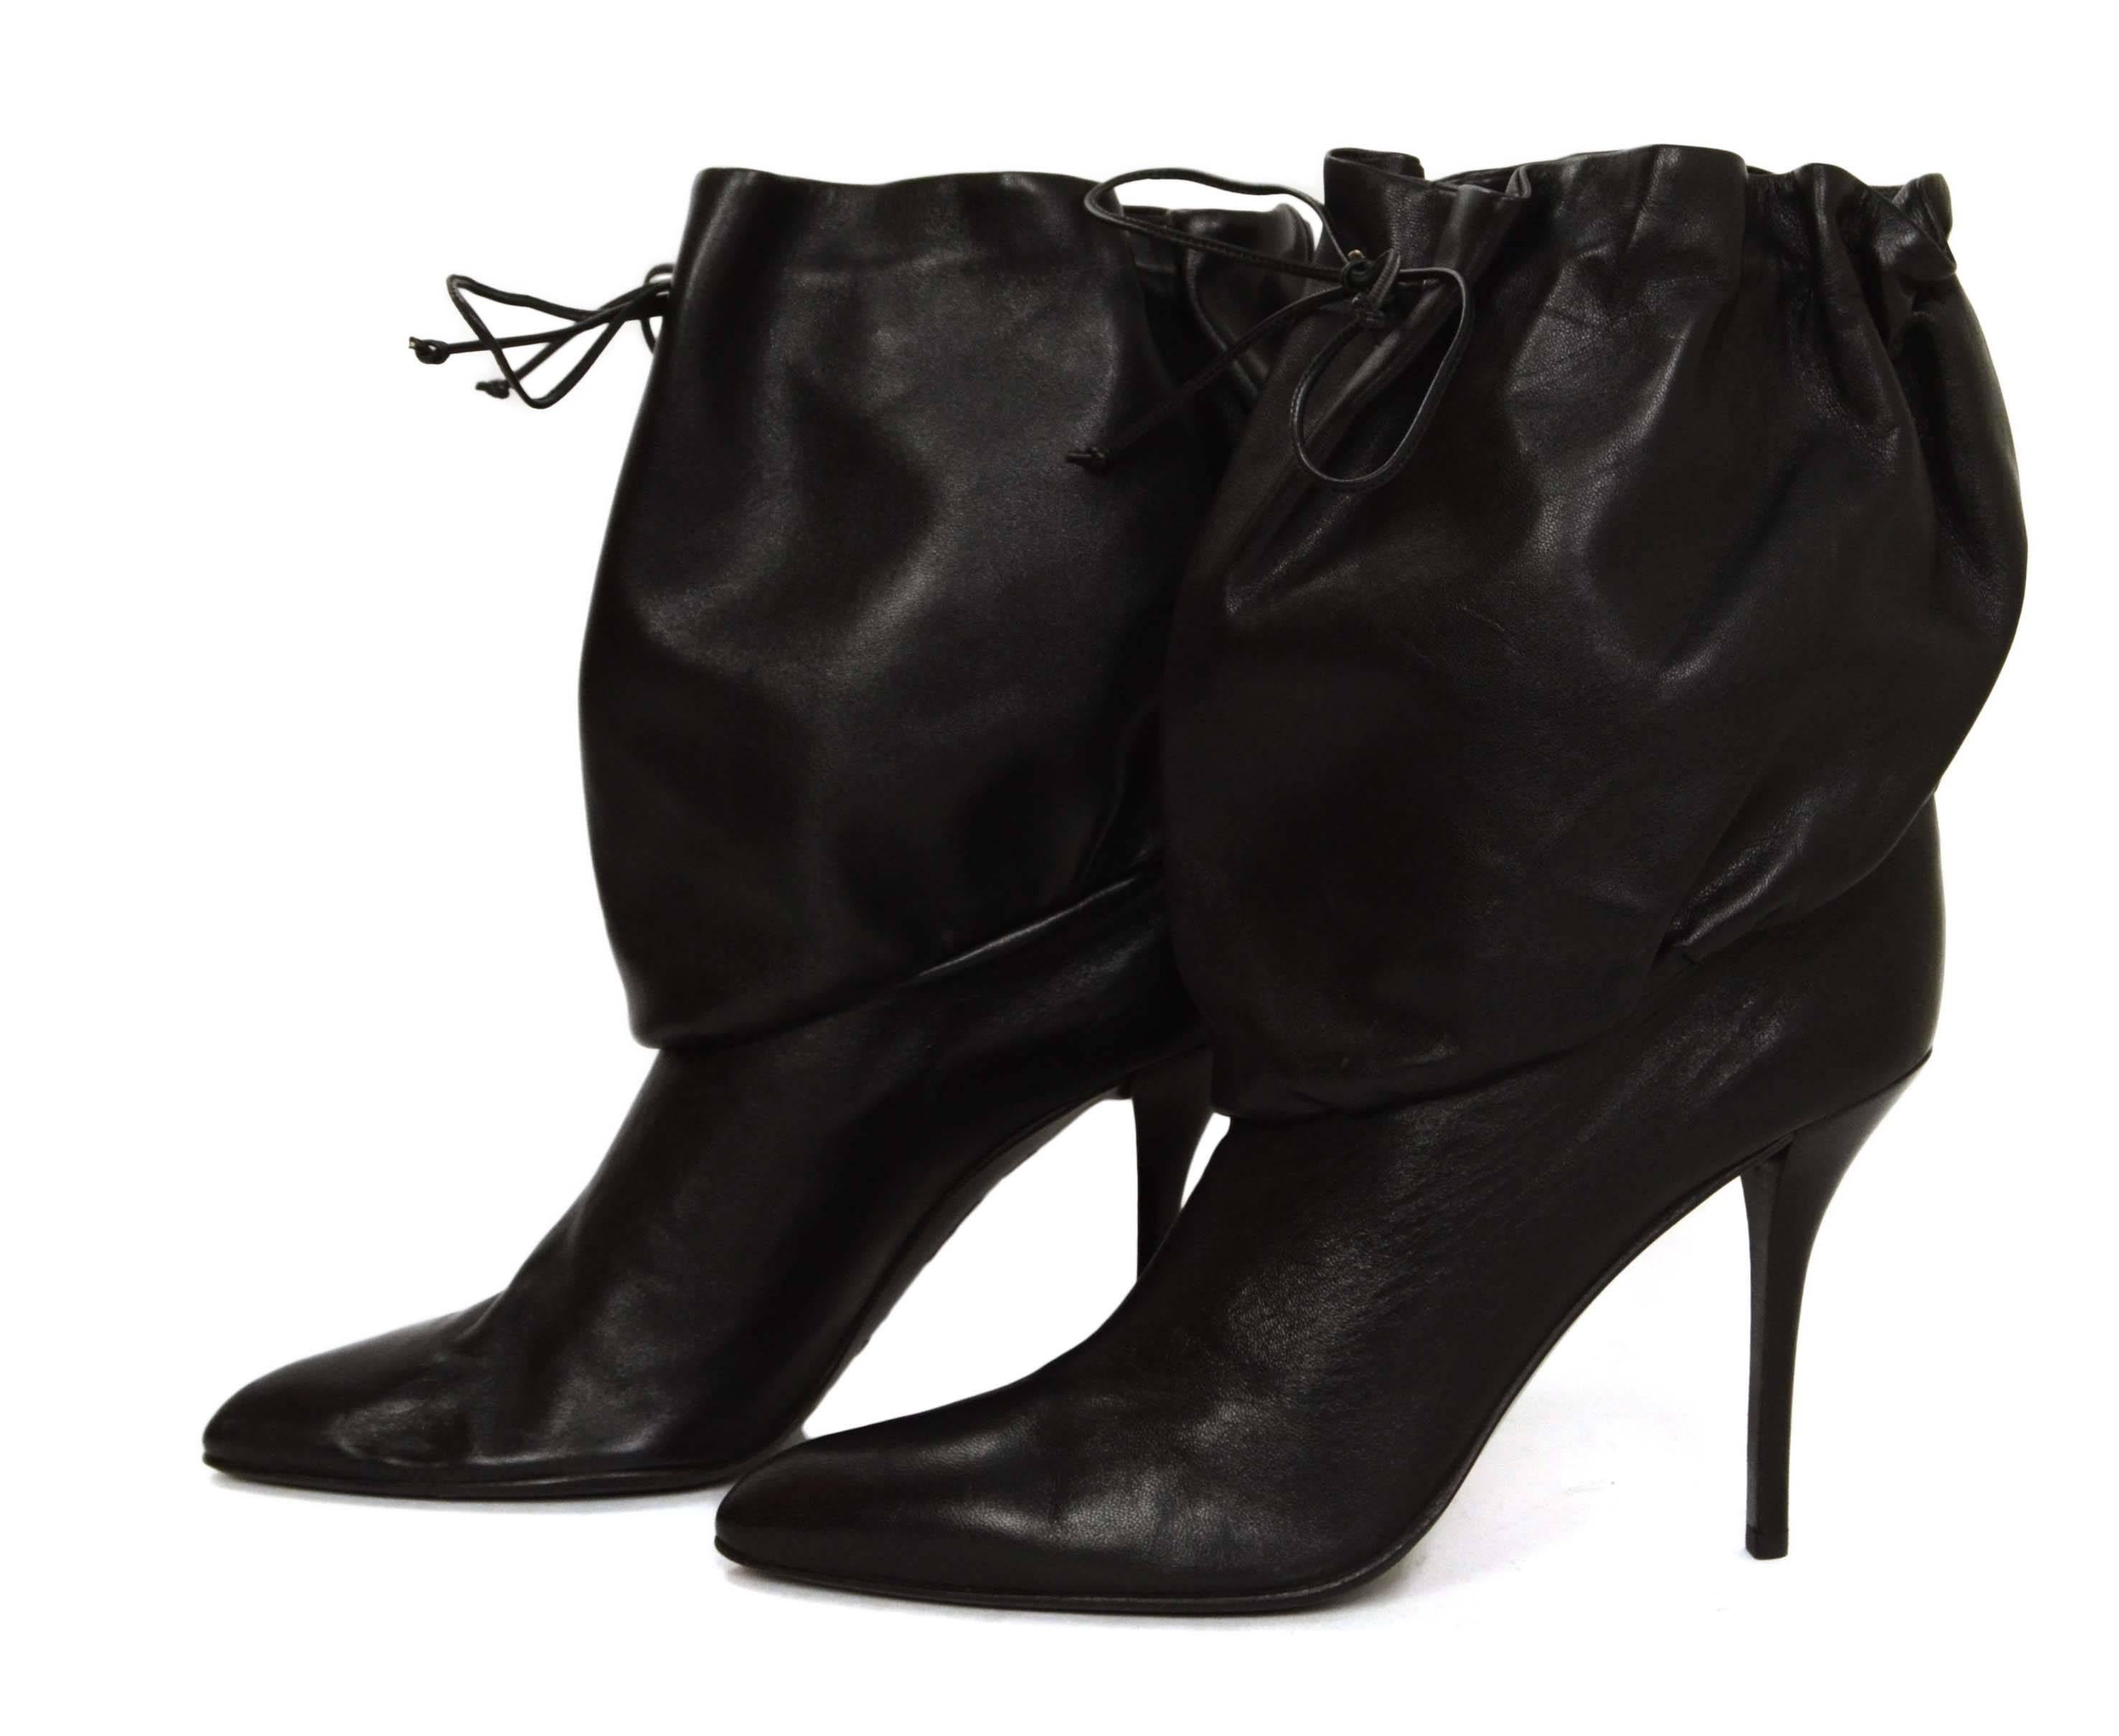 Helmut Lang Black Leather Drawstring Boots 
Made In: Italy
Color: Black
Materials: Leather
Closure/Opening: Pull on with drawstring to tighten and secure closure
Sole Stamp: Helmut Lang Made in Italy 40 Very Cuoio
Overall Condition: Excellent